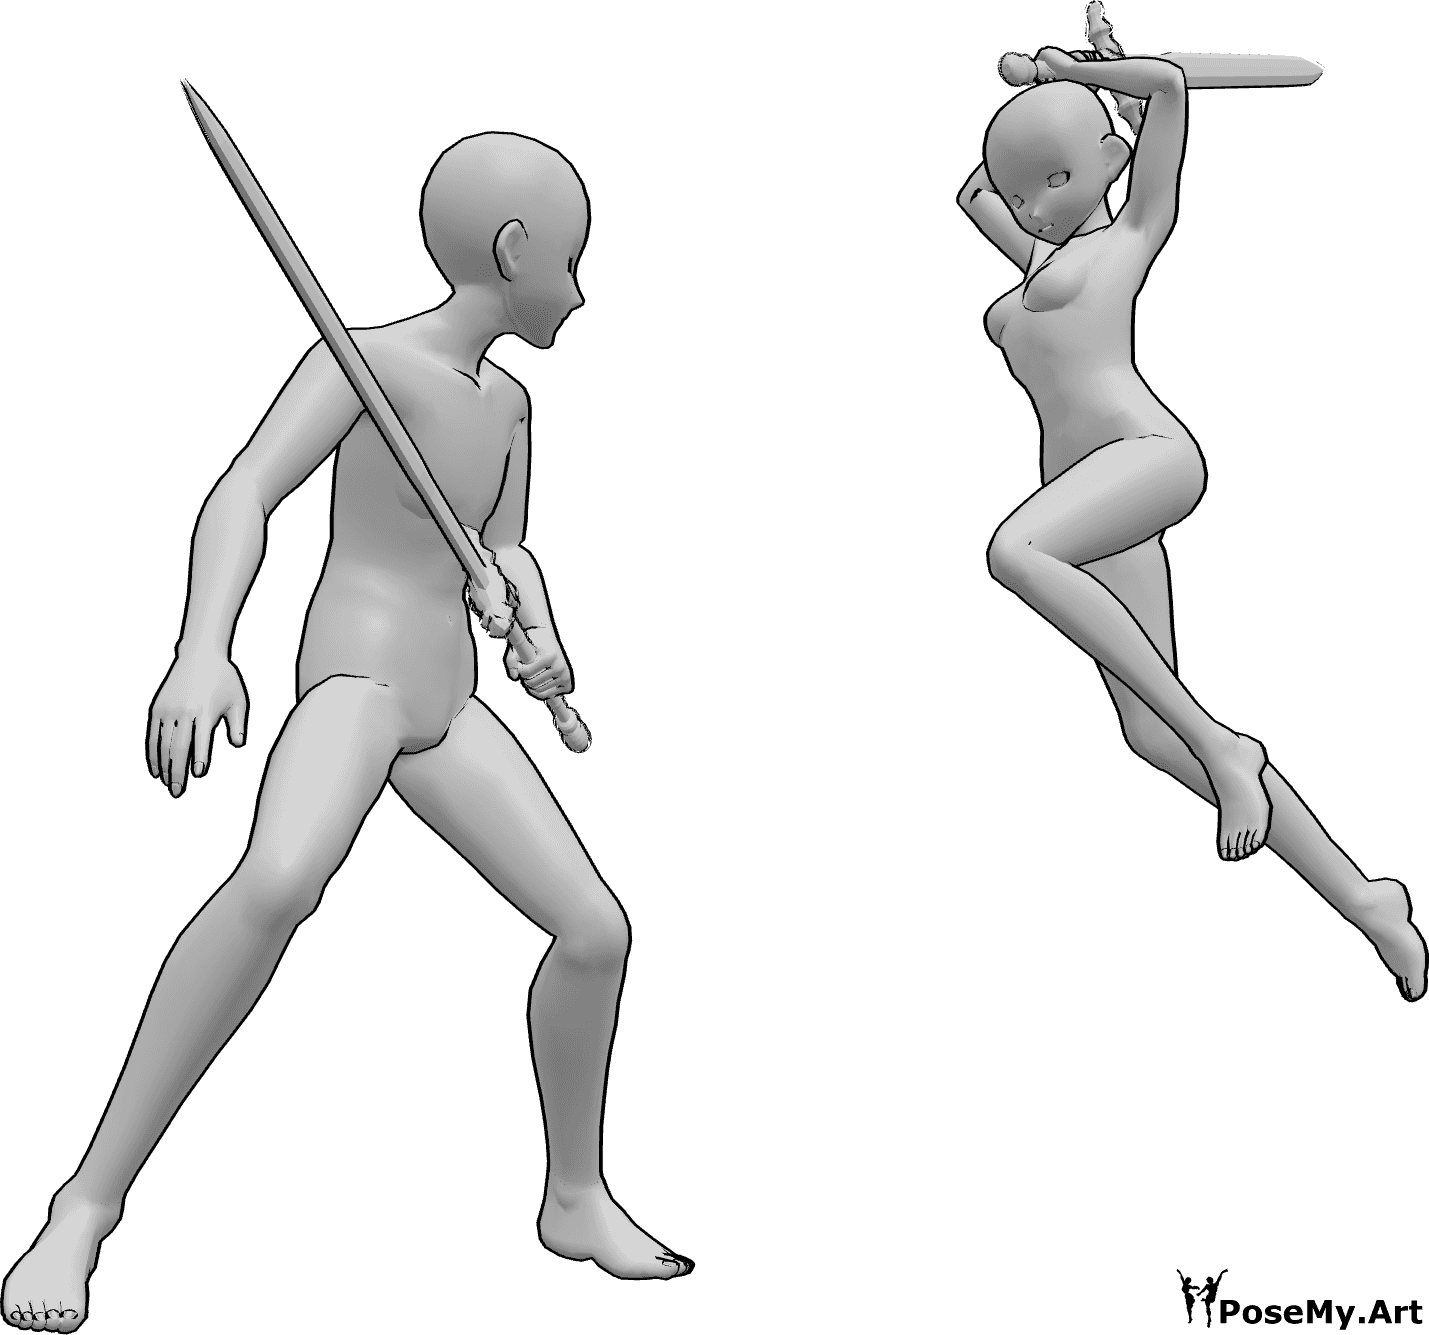 Pose Reference- Anime sword battle pose - Anime female and male are fighting with swords, female is about to strike with her sword